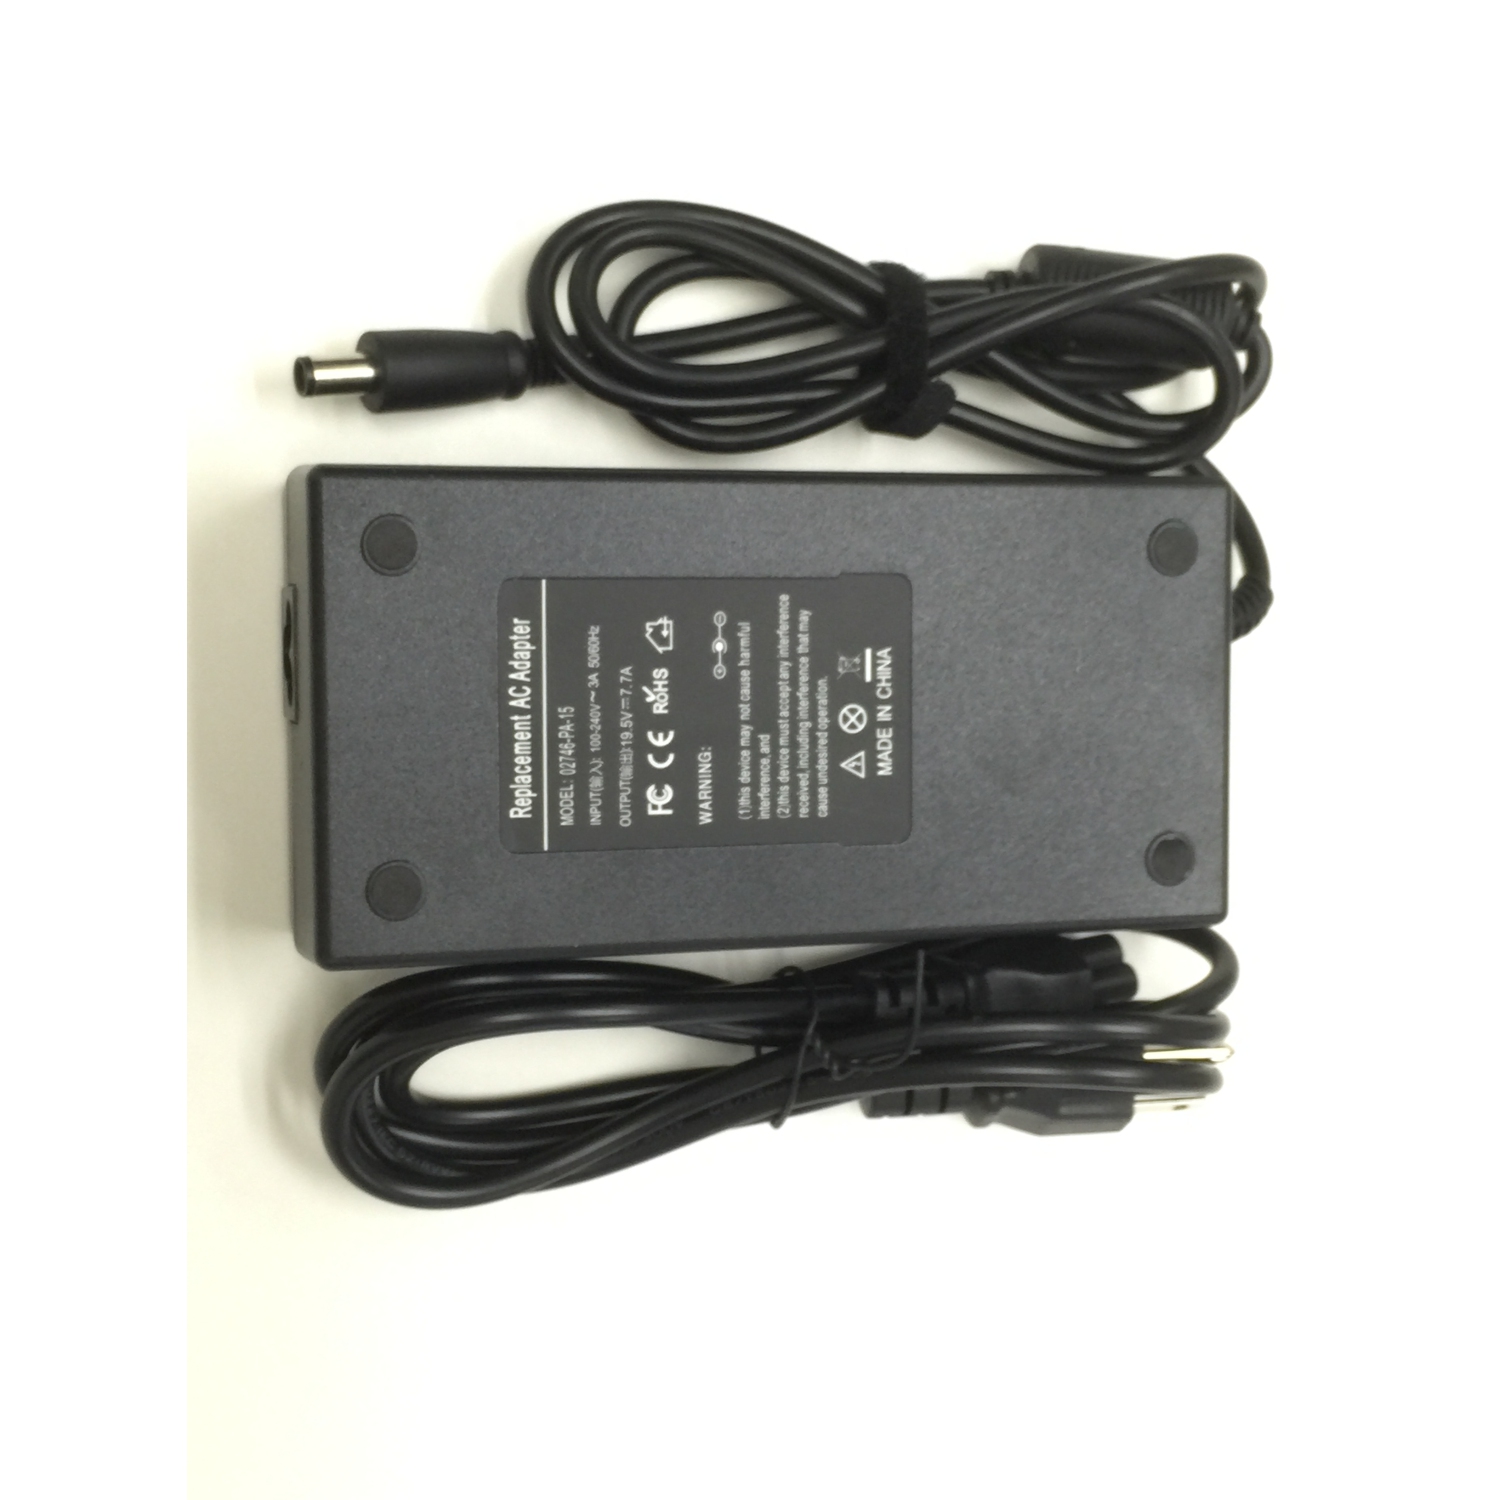 150W new AC adapter charger for Dell Inspiron all-in-one touch screen desktop, NOT FOR Inspiron 15 5000 2-in1